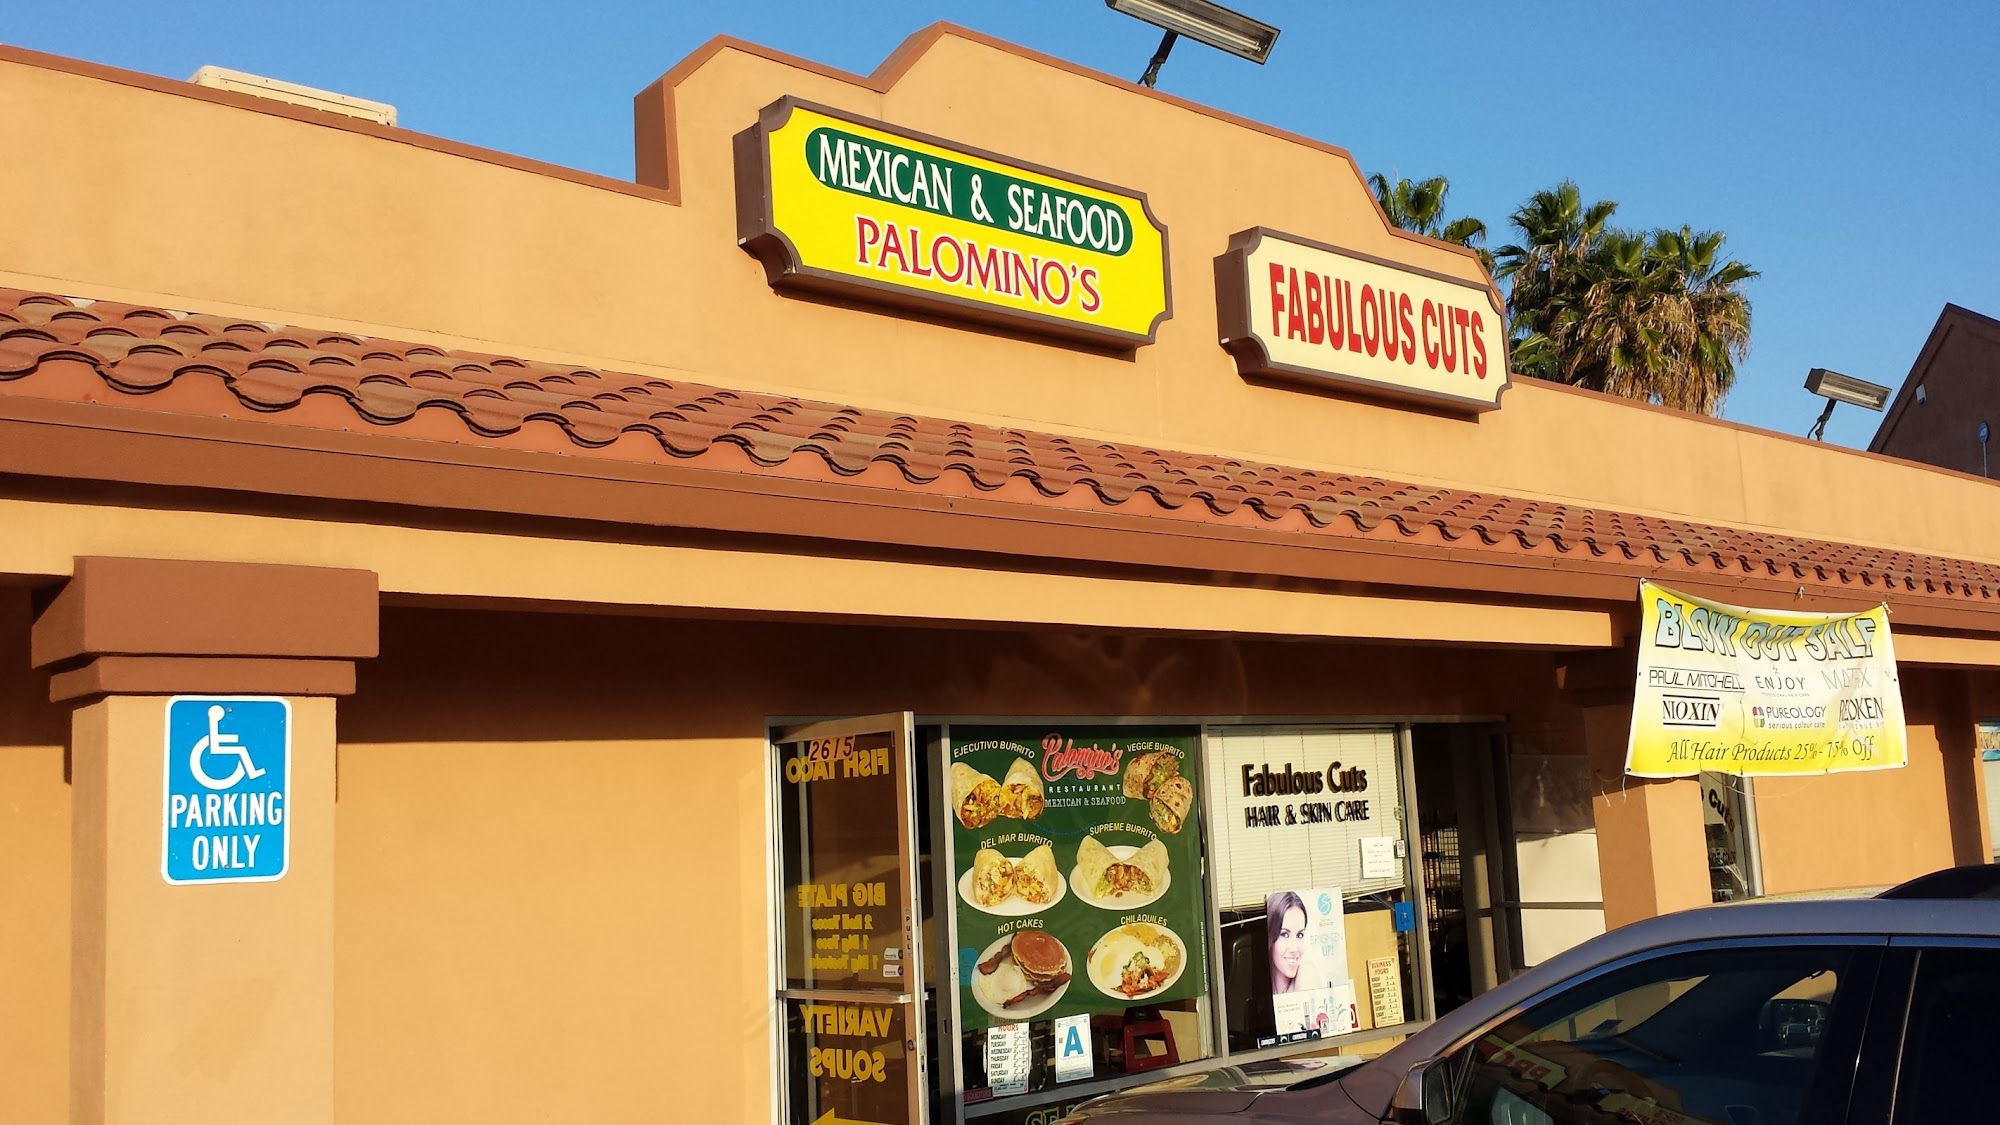 Palomino's Mexican & Seafood Restaurant